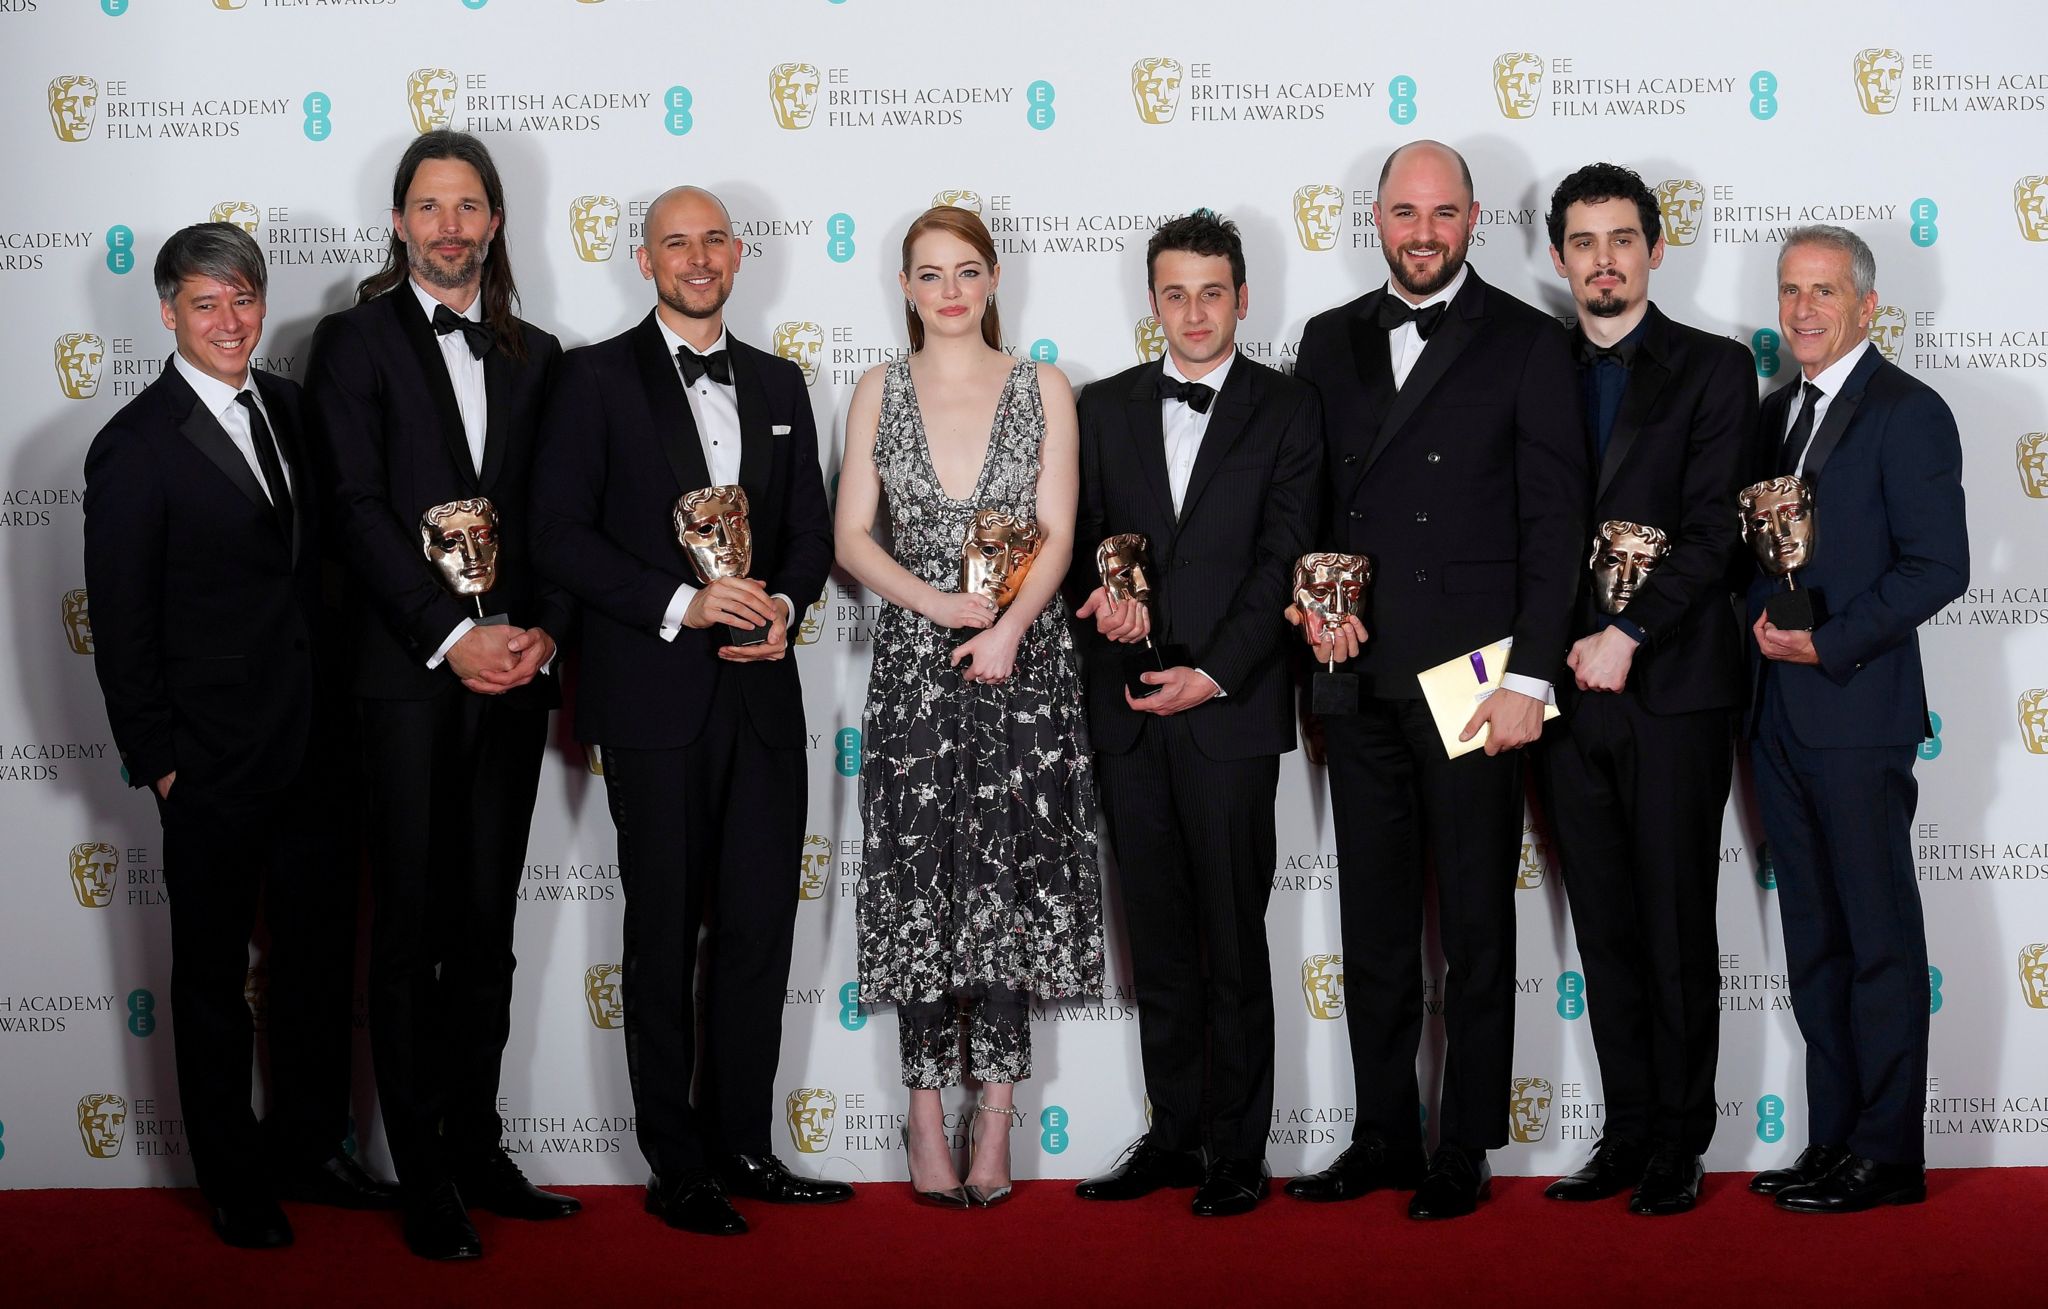 The team behind "La La Land" hold their awards for Best Film at the British Academy of Film and Television Awards (BAFTA) at the Royal Albert Hall in London, Britain on 12 February 2017